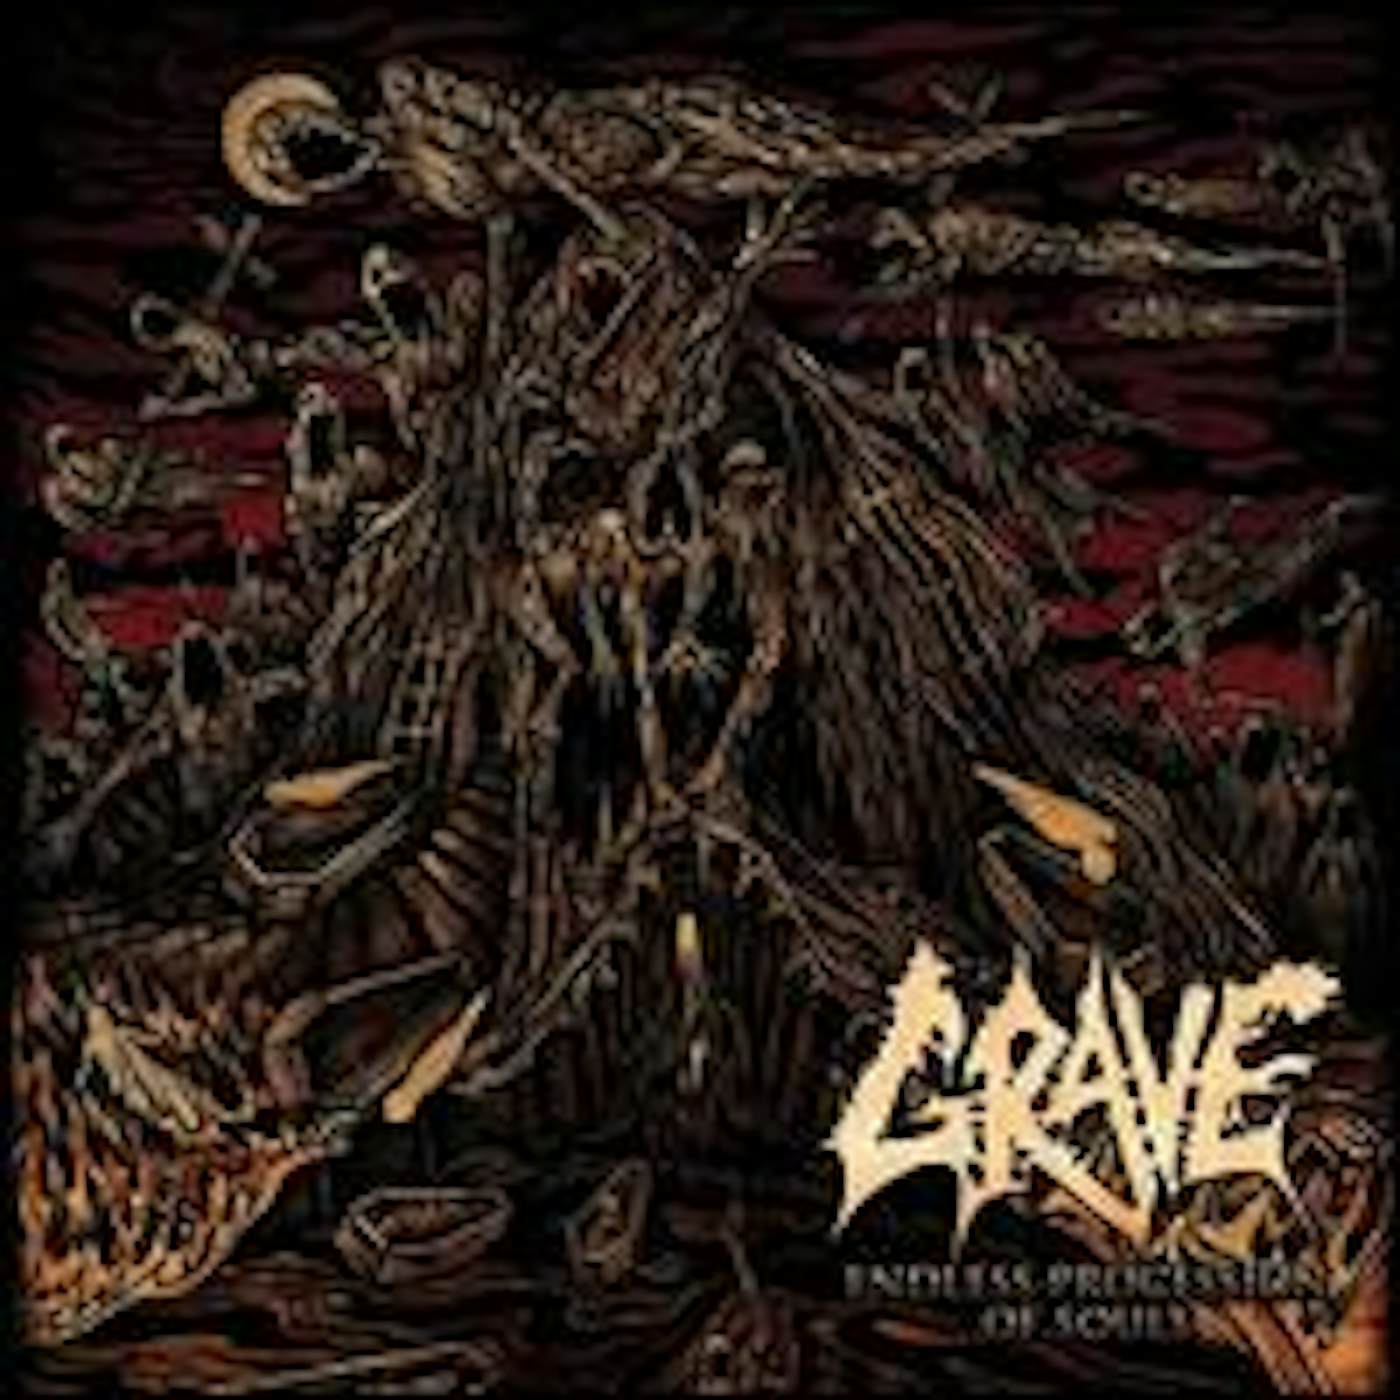 Grave ENDLESS PROCESSION OF SOULS CD